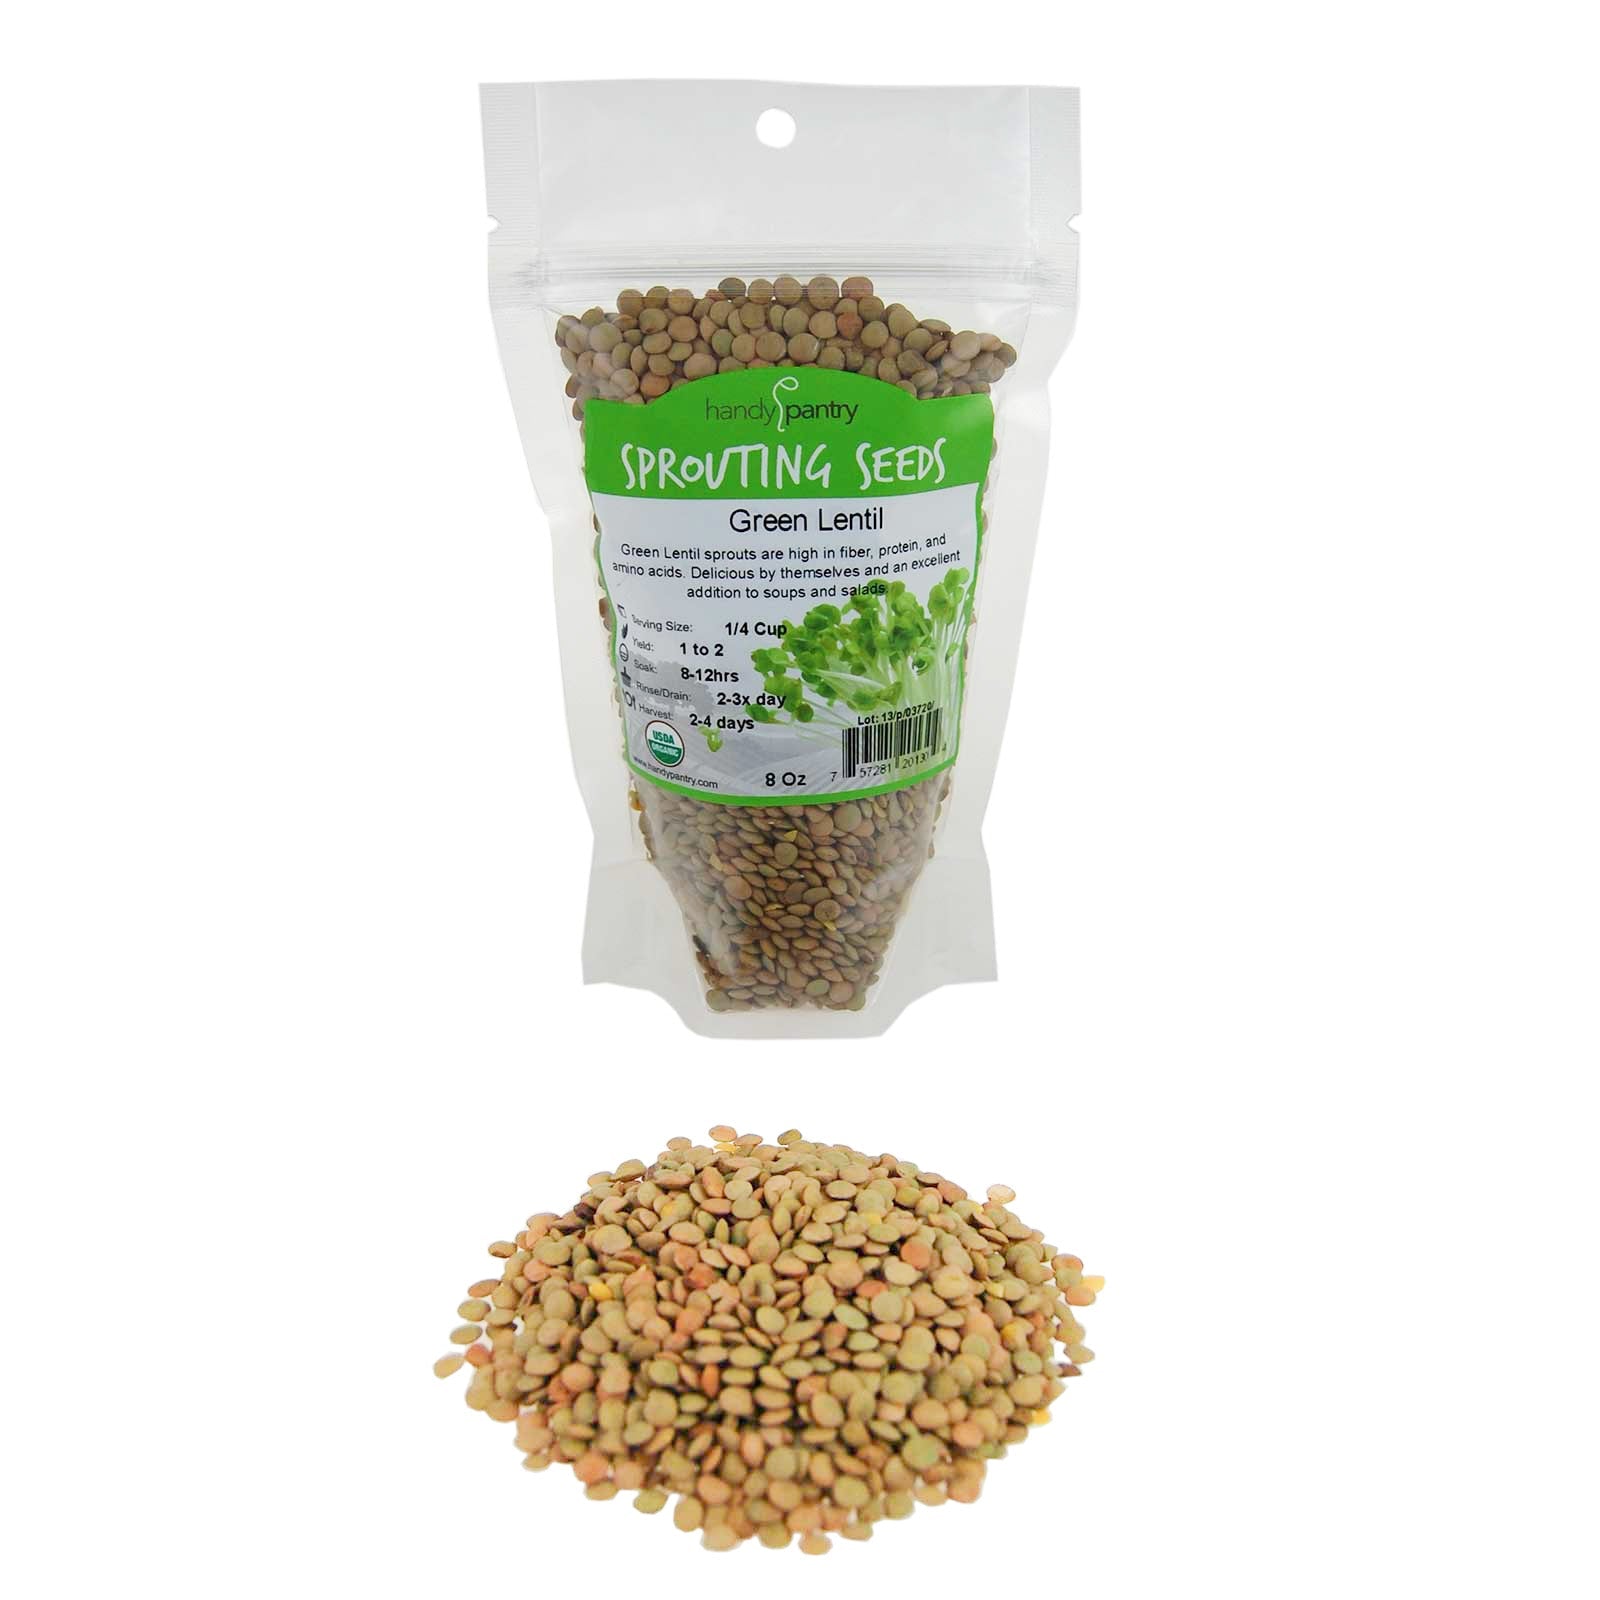 Handy Pantry Green Lentils | Organic Microgreens Sprouting Seeds